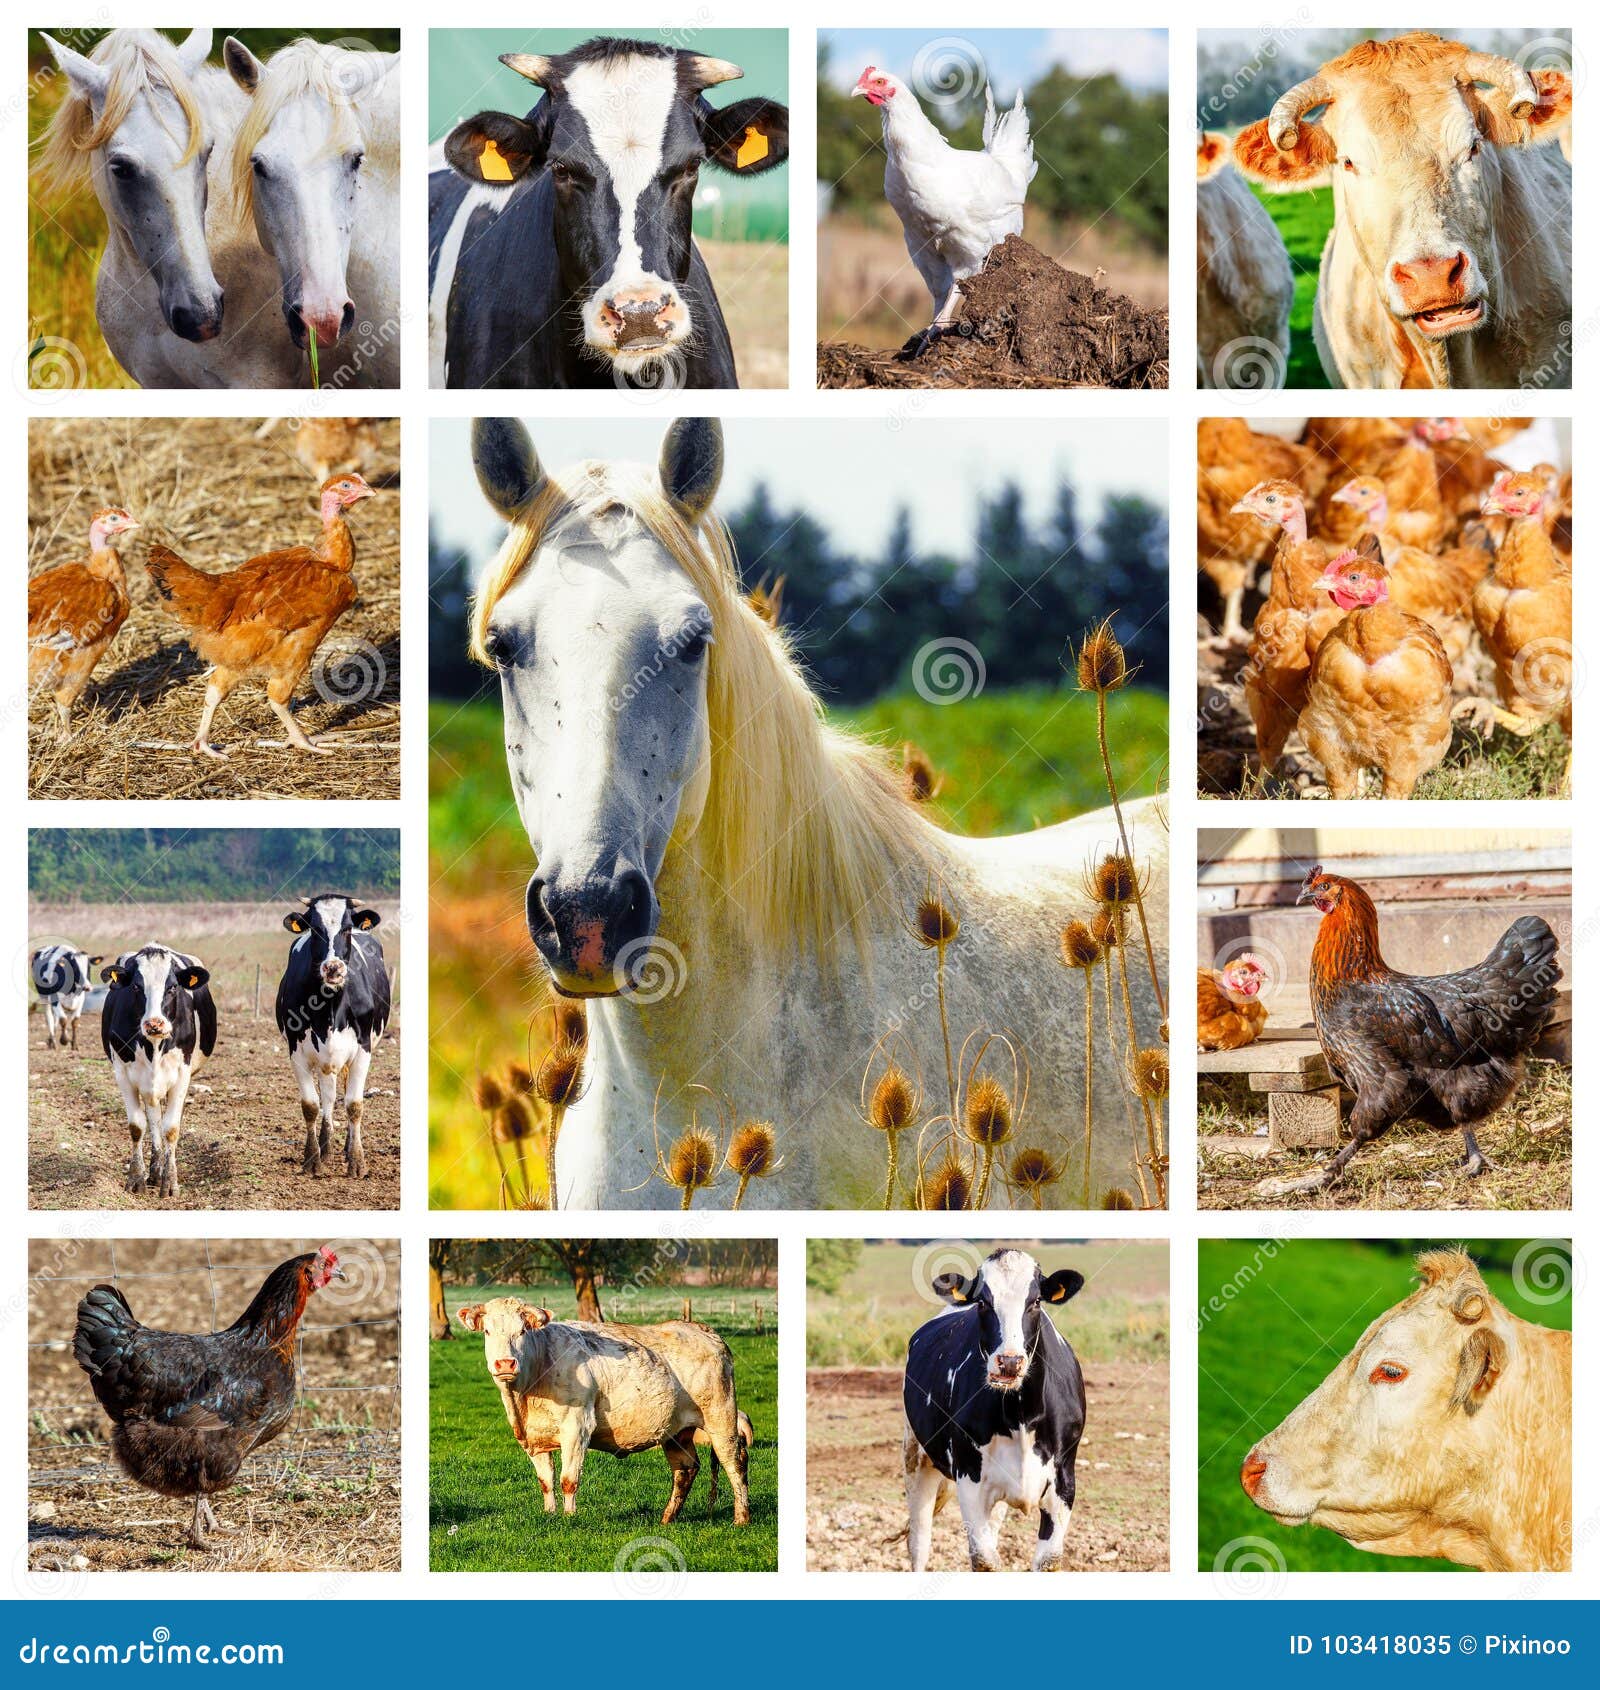 collage representing several farm animals and a wild horse